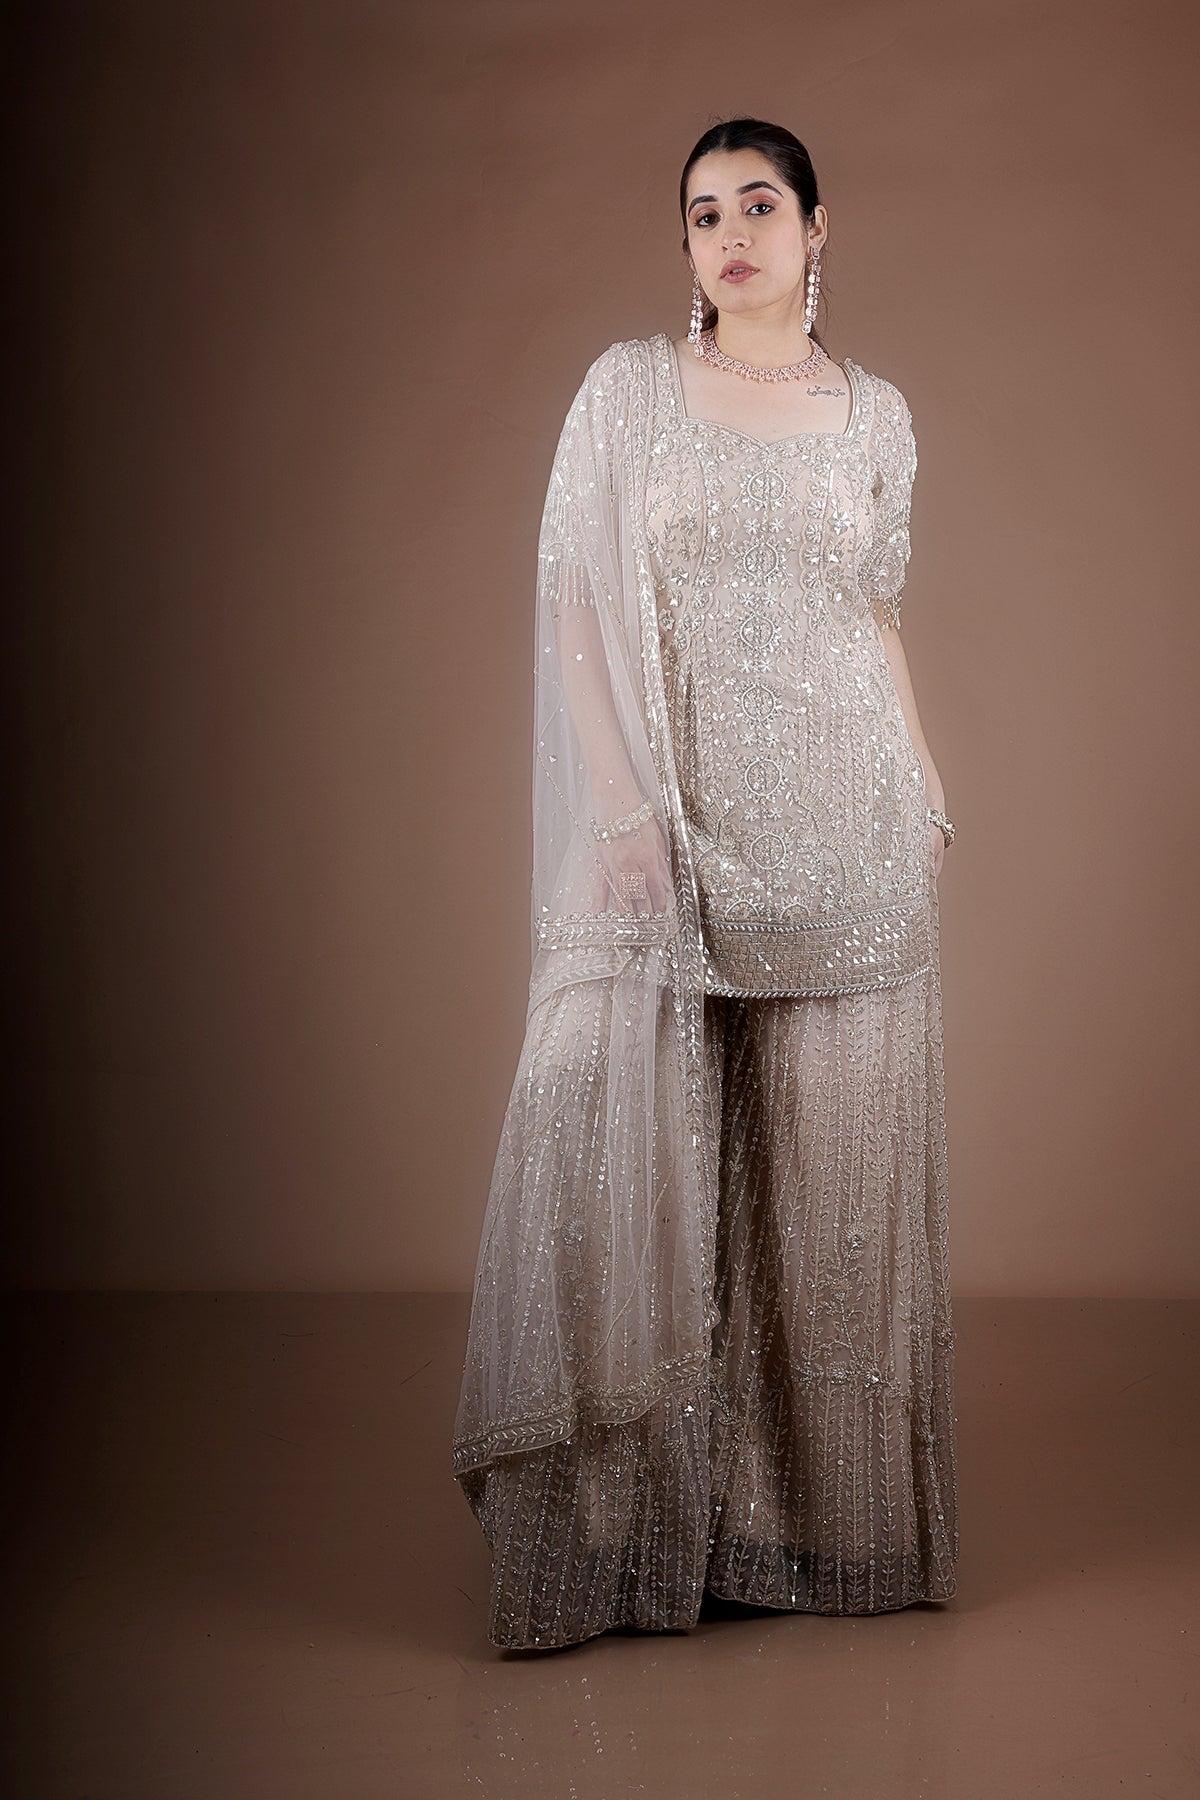 Peach Sharara suit adorned with hand embroidery